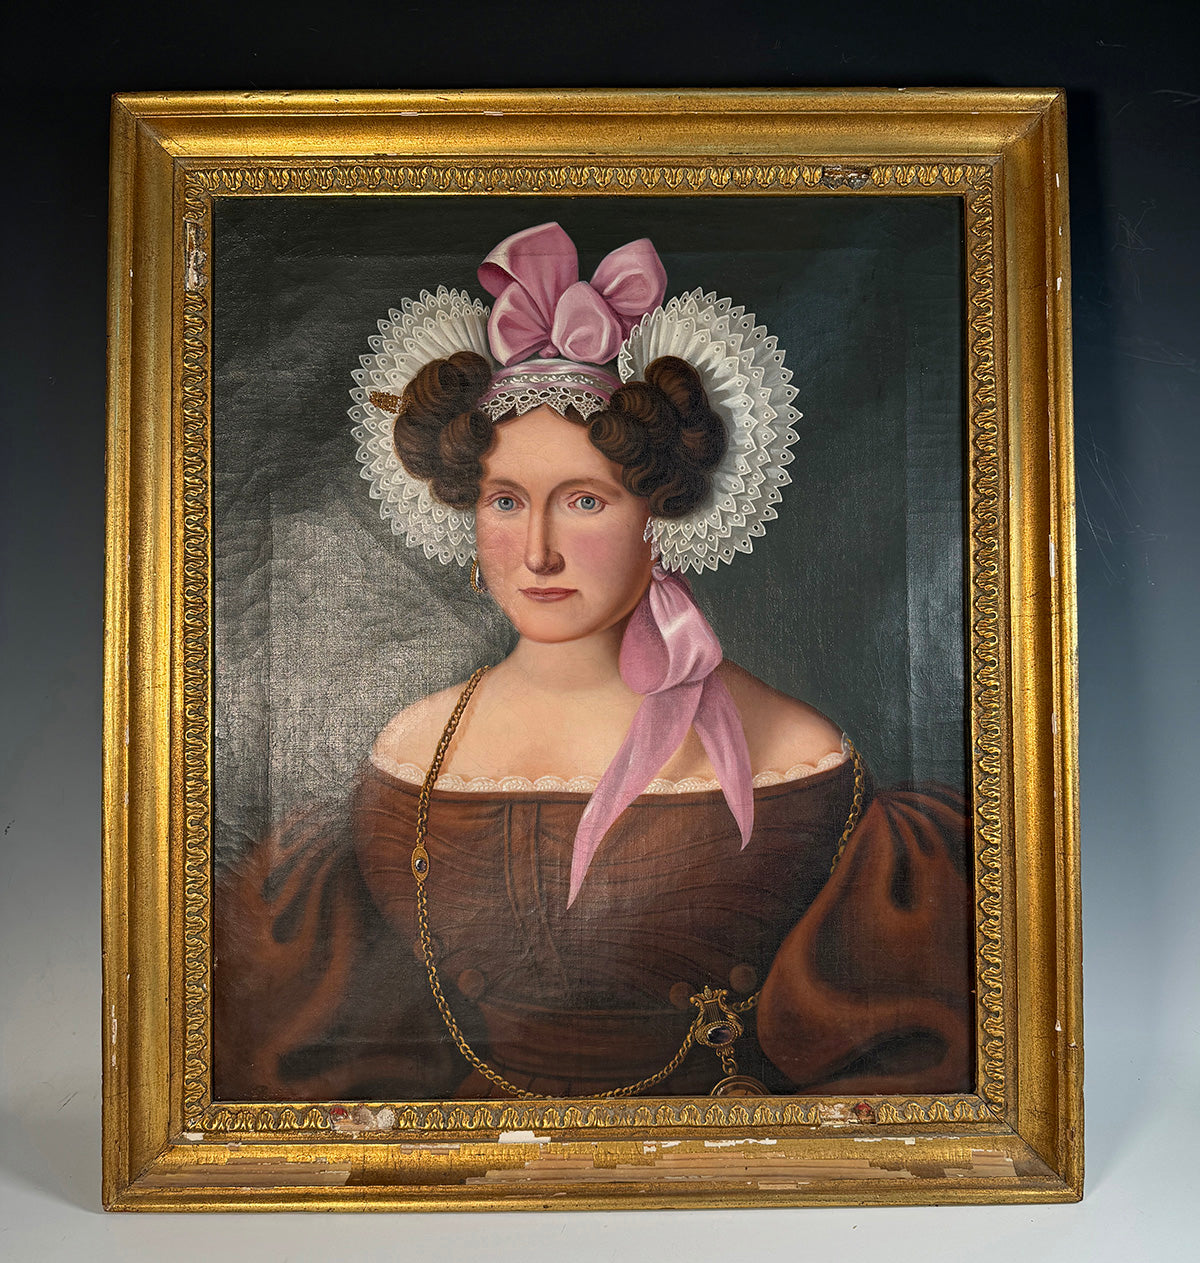 Fine Antique Oil Painting Portrait of a Lady, c.1830 with Lace Hat, Beautiful Jewelry and Gown